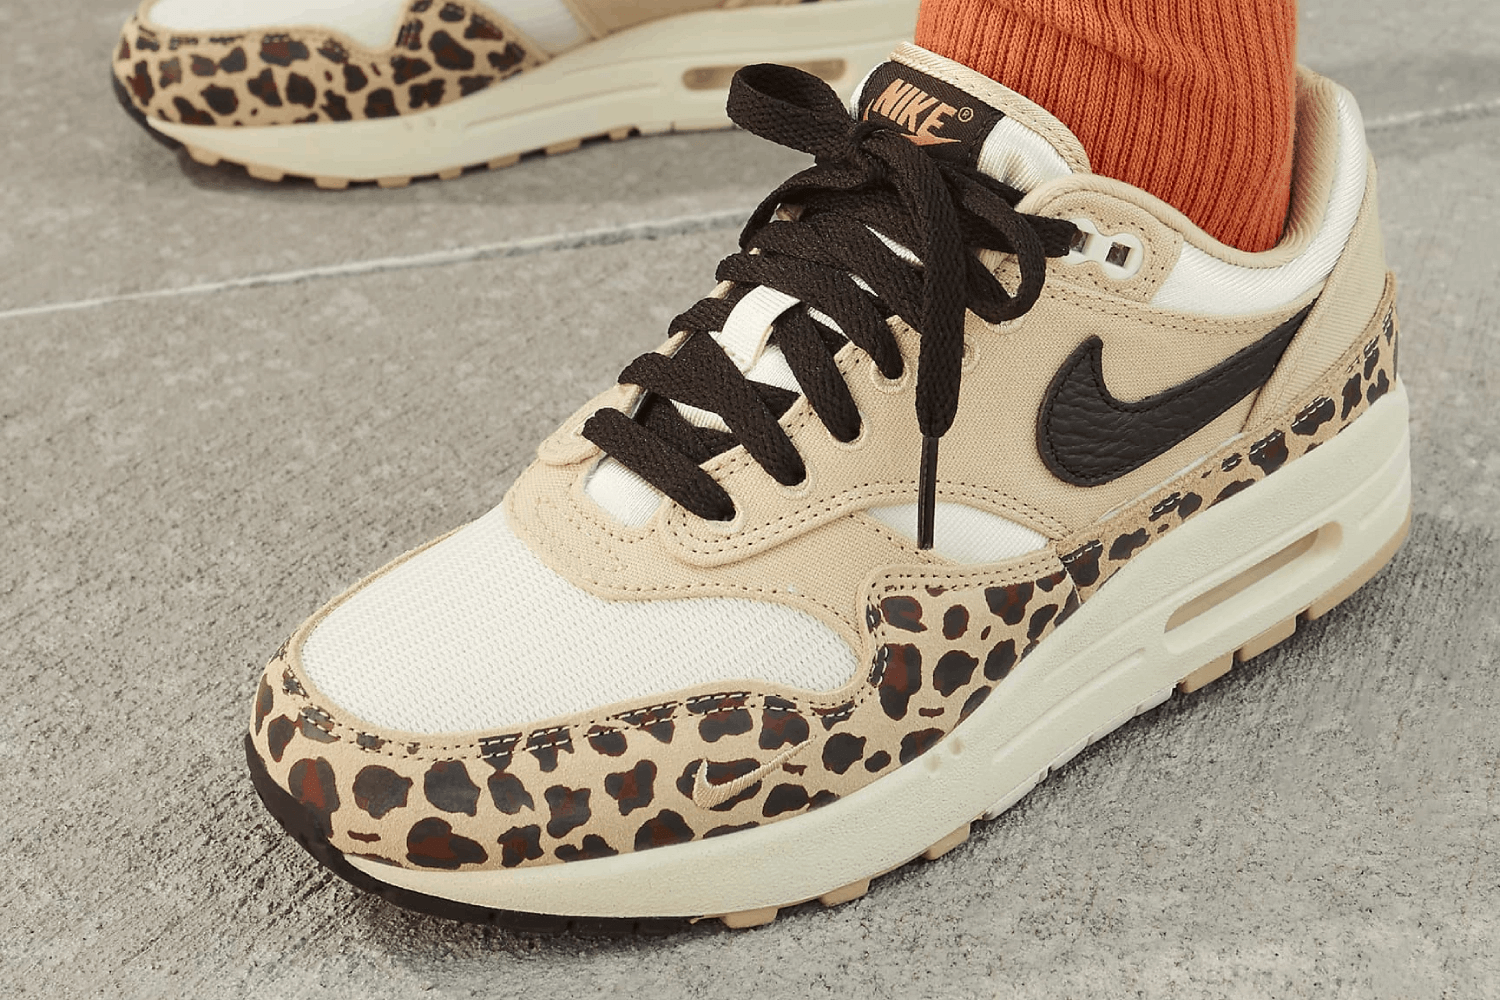 Release reminder: Nike Air Max 1 '87 WMNS 'Leopard'